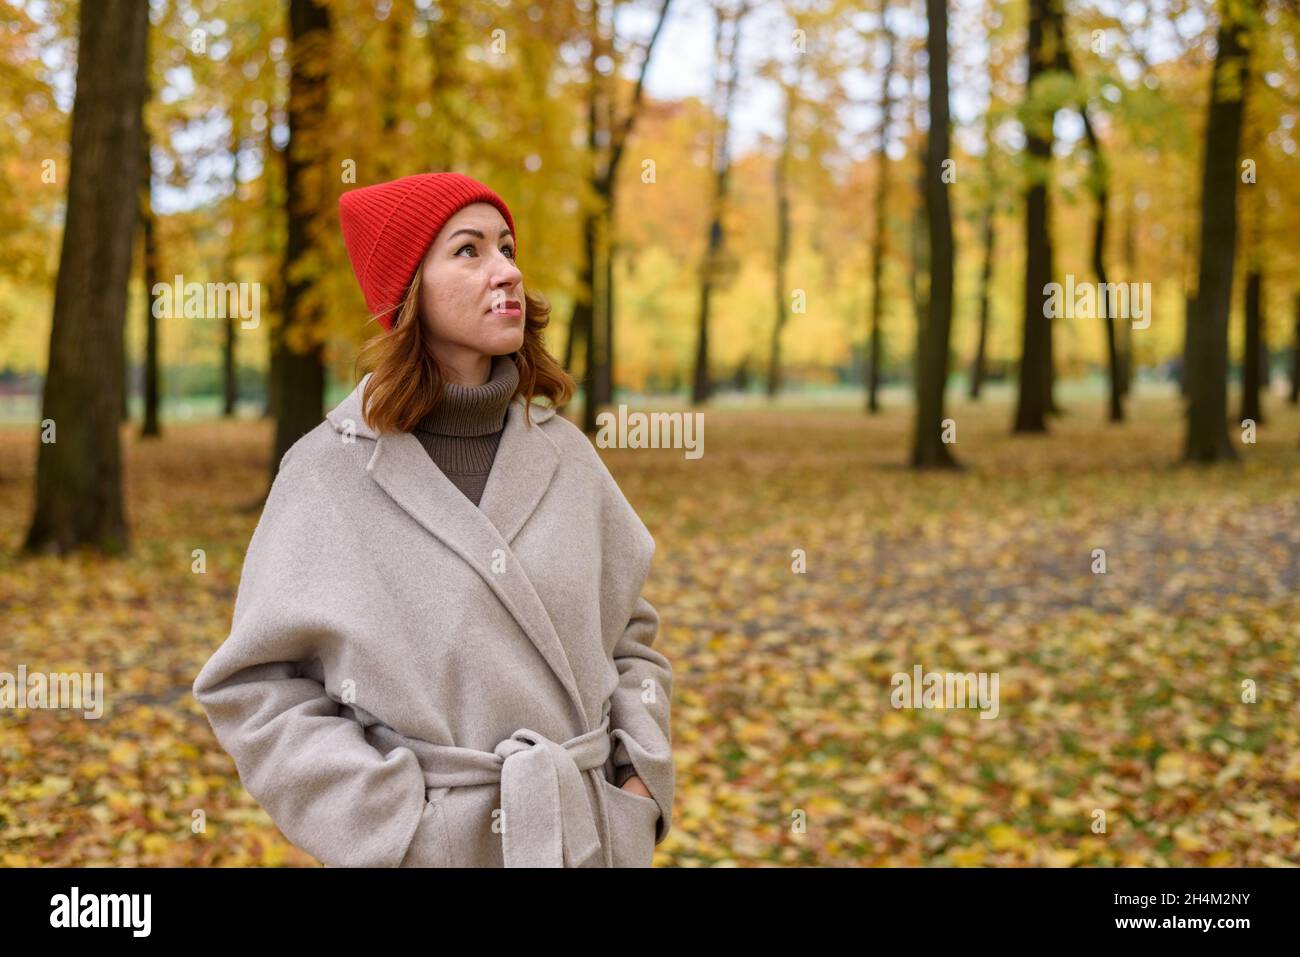 Portrait of woman in wool coat and red hat at autumn park Stock Photo